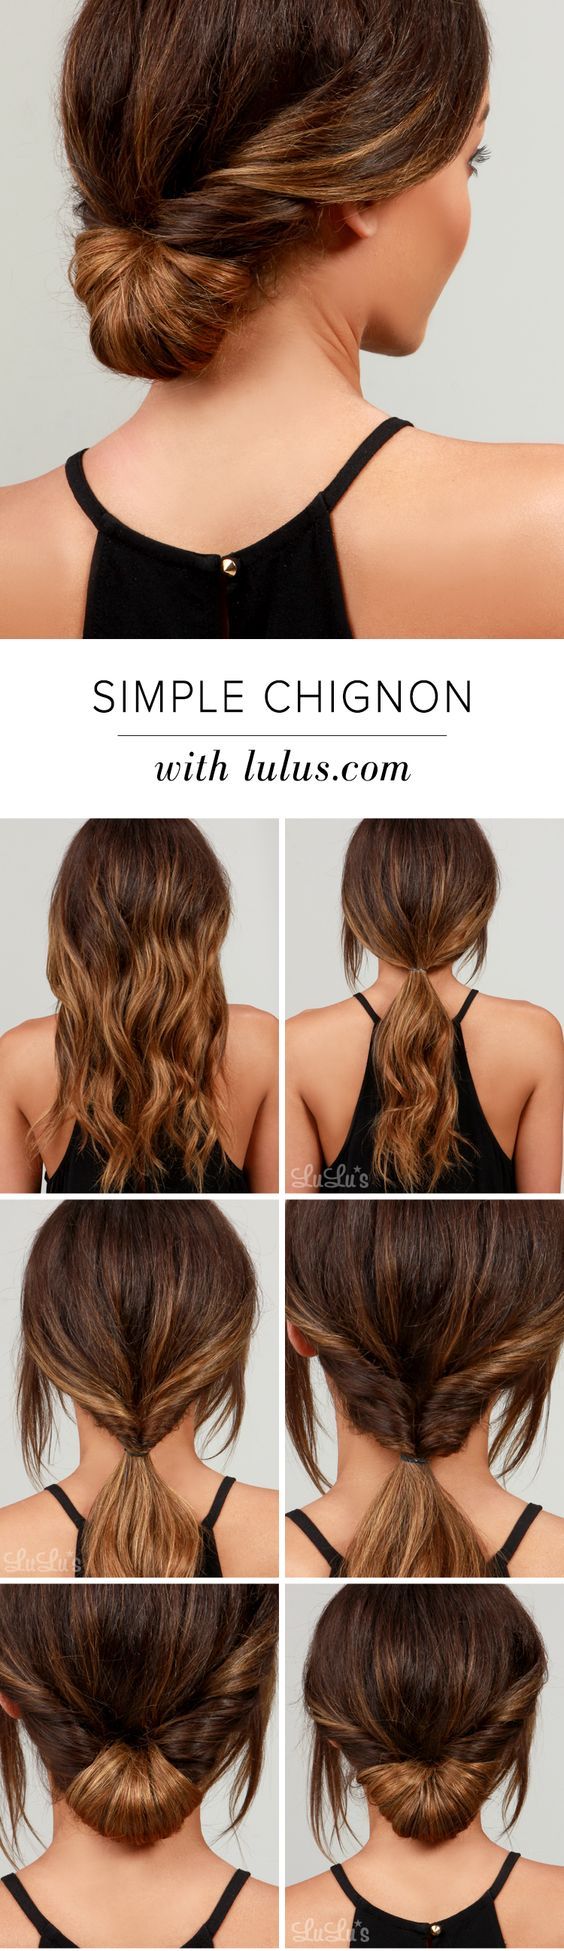 15 Easy Yet Trendy Hairstyles for Lazy Women